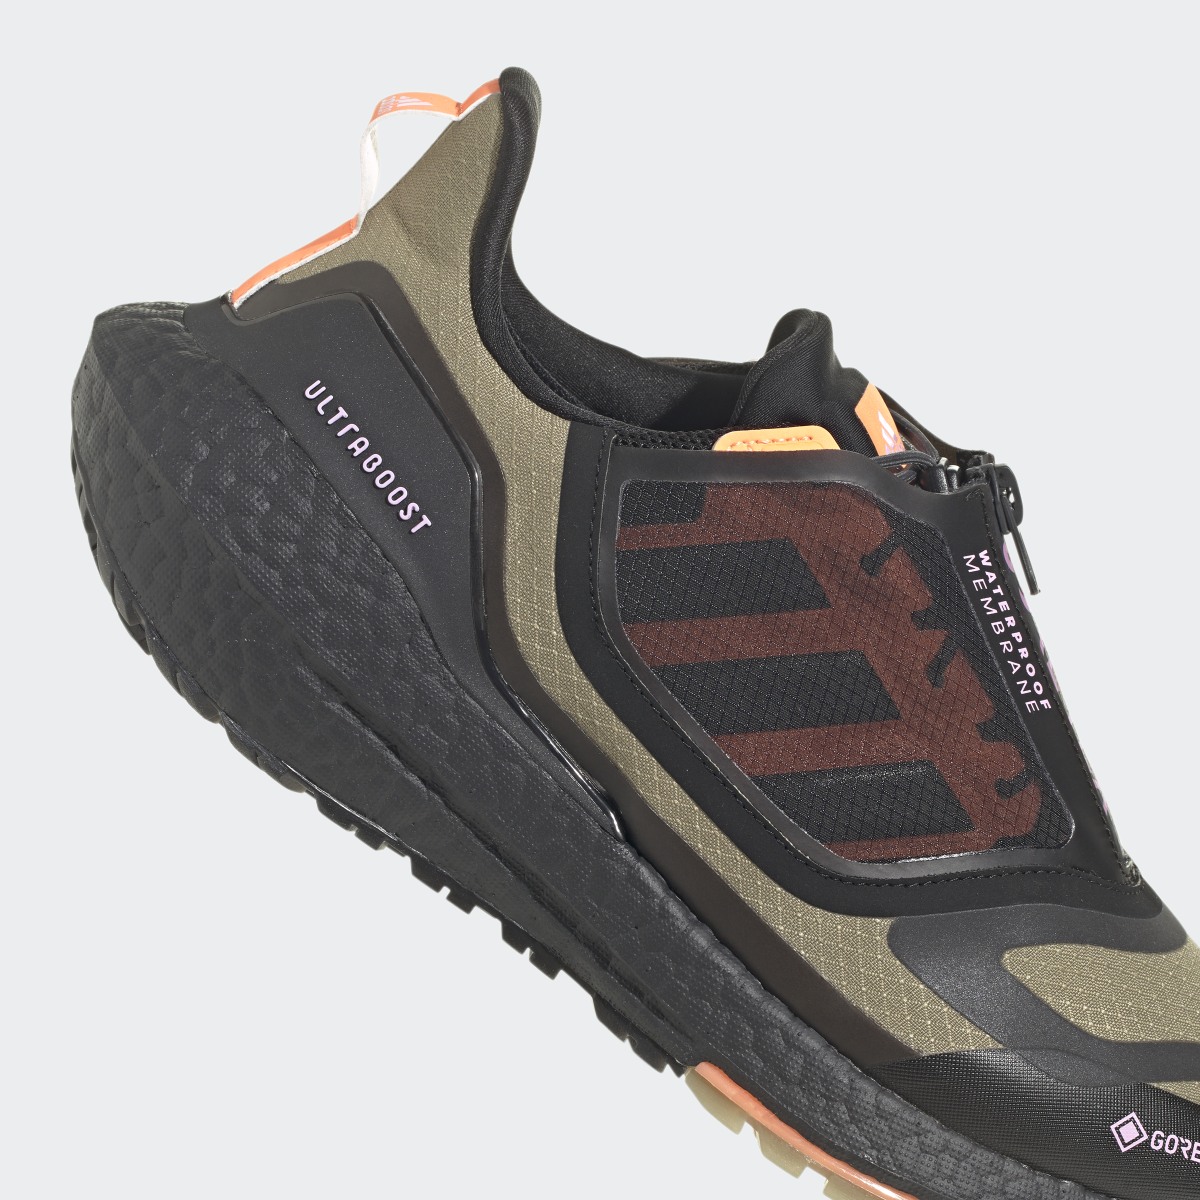 Adidas Ultraboost 22 GORE-TEX Shoes. 12